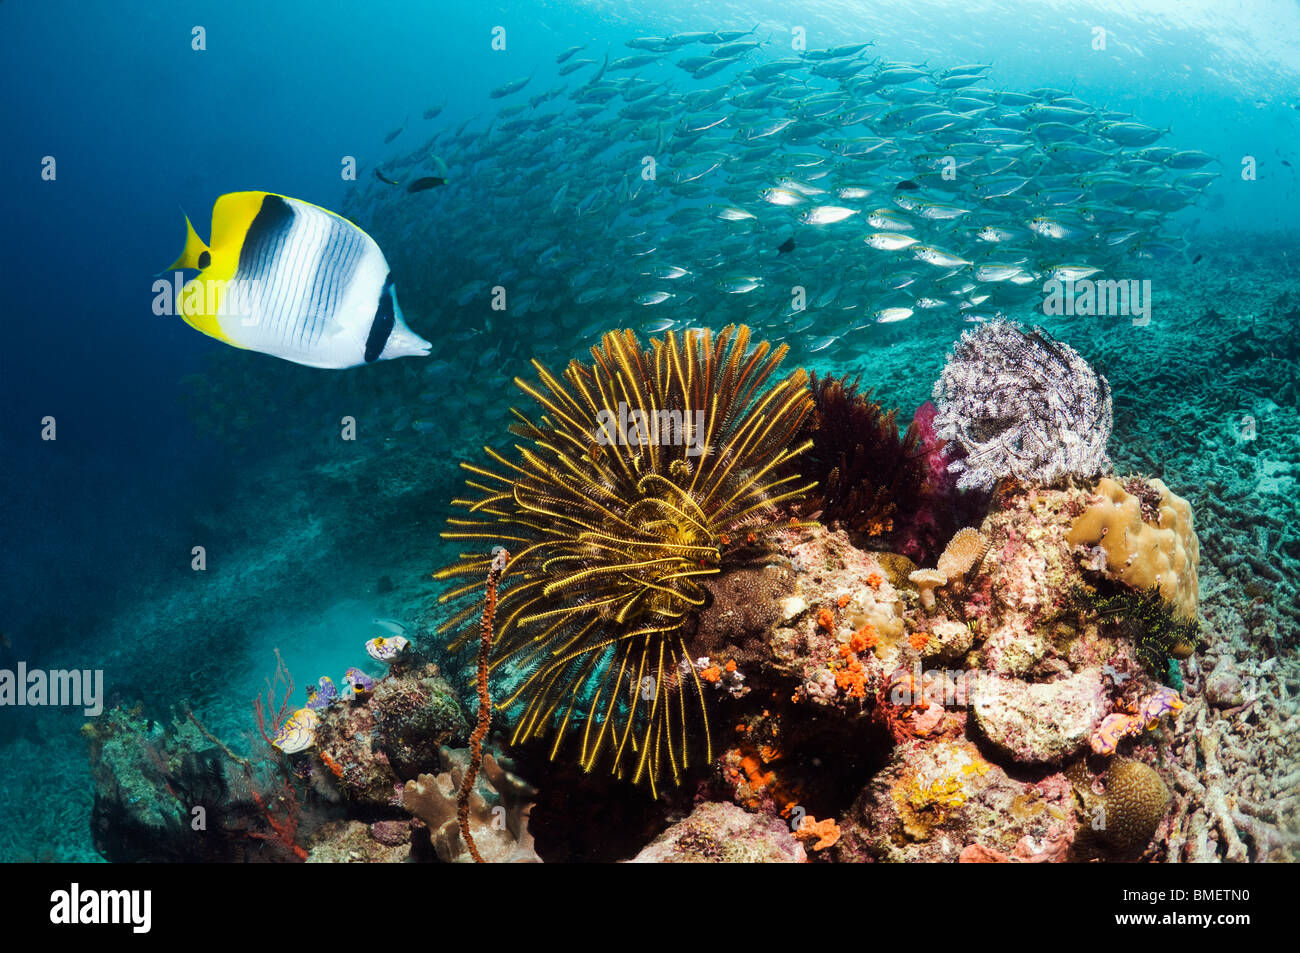 Pacific double-saddle butterflyfish with featherstars and a school of Bigeye scad.  Misool, Raja Empat, West Papua, Indonesia. Stock Photo